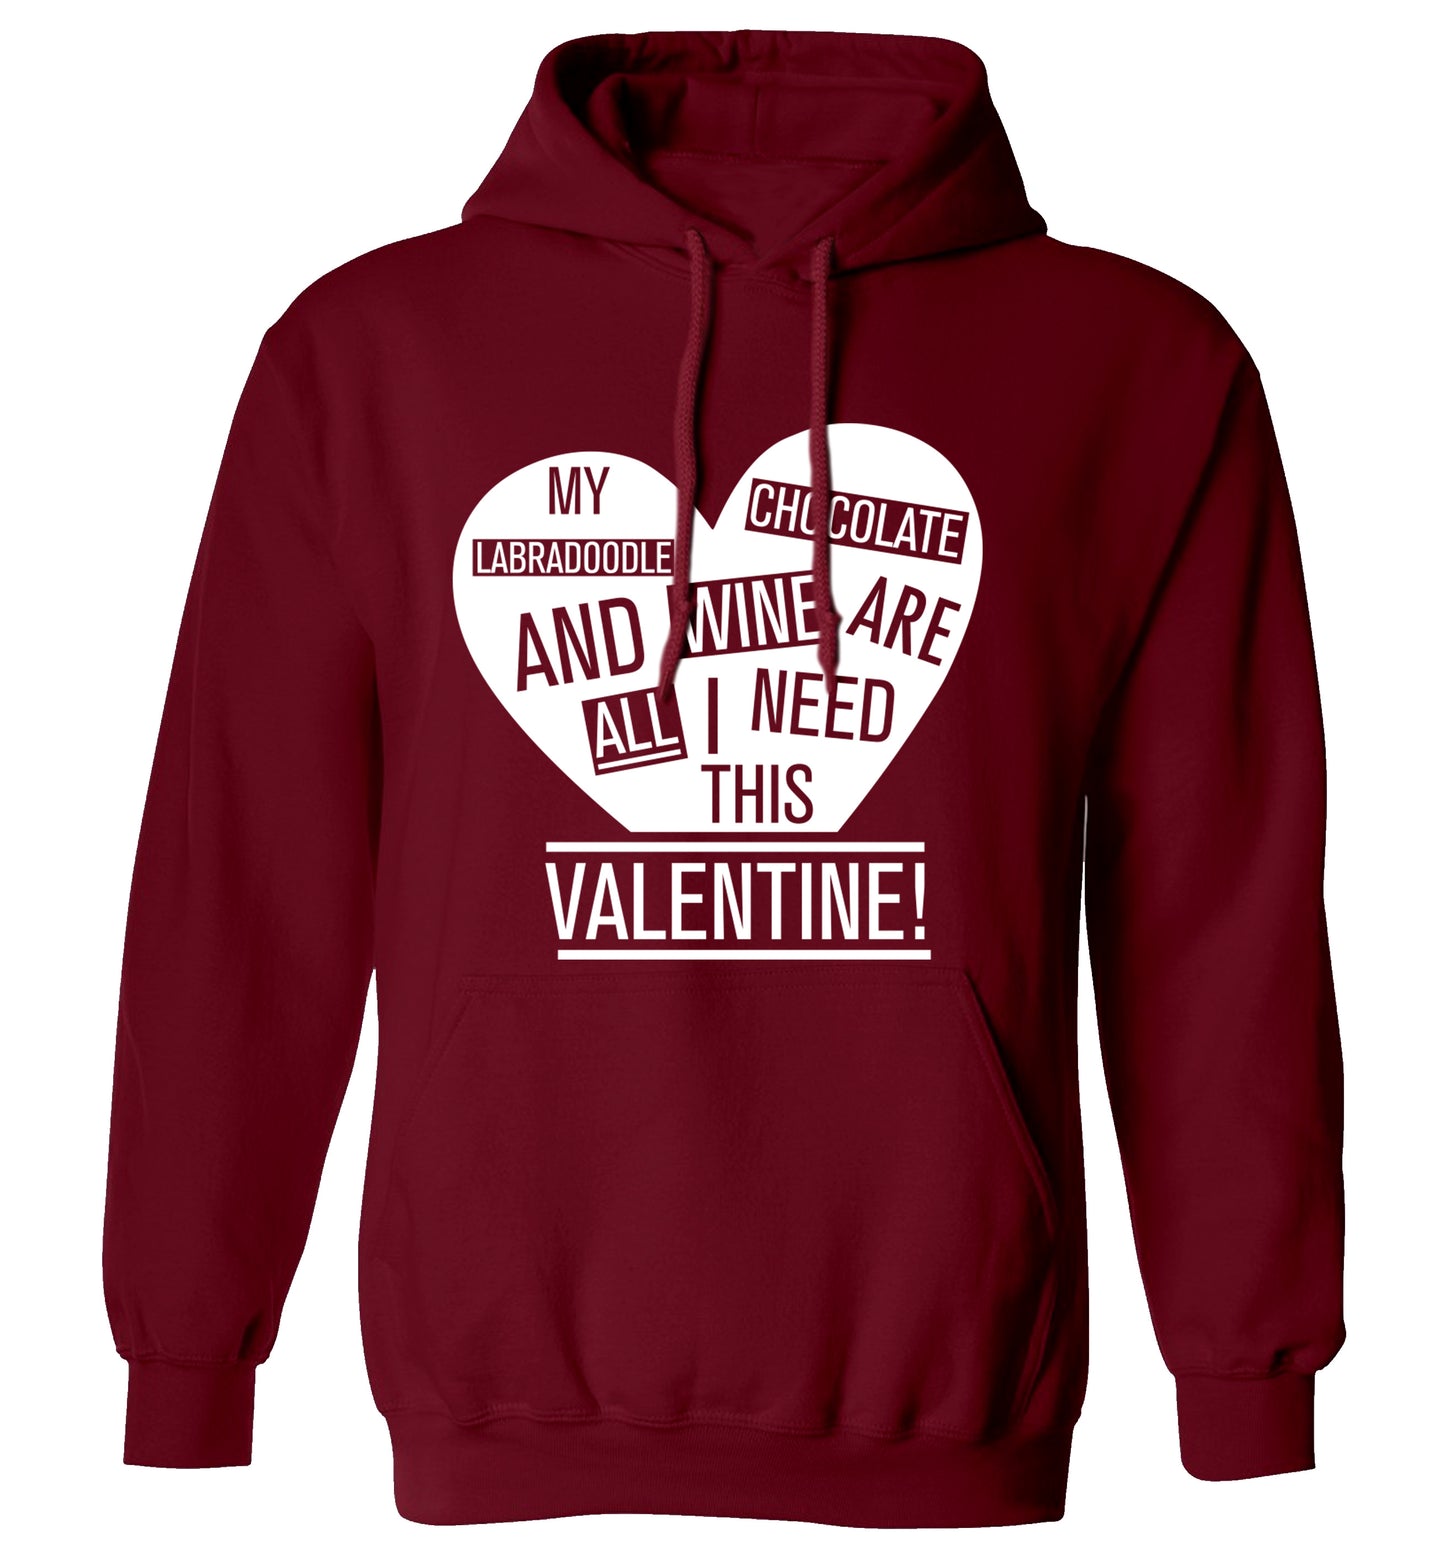 My labradoodle, chocolate and wine are all I need this valentine! adults unisex maroon hoodie 2XL